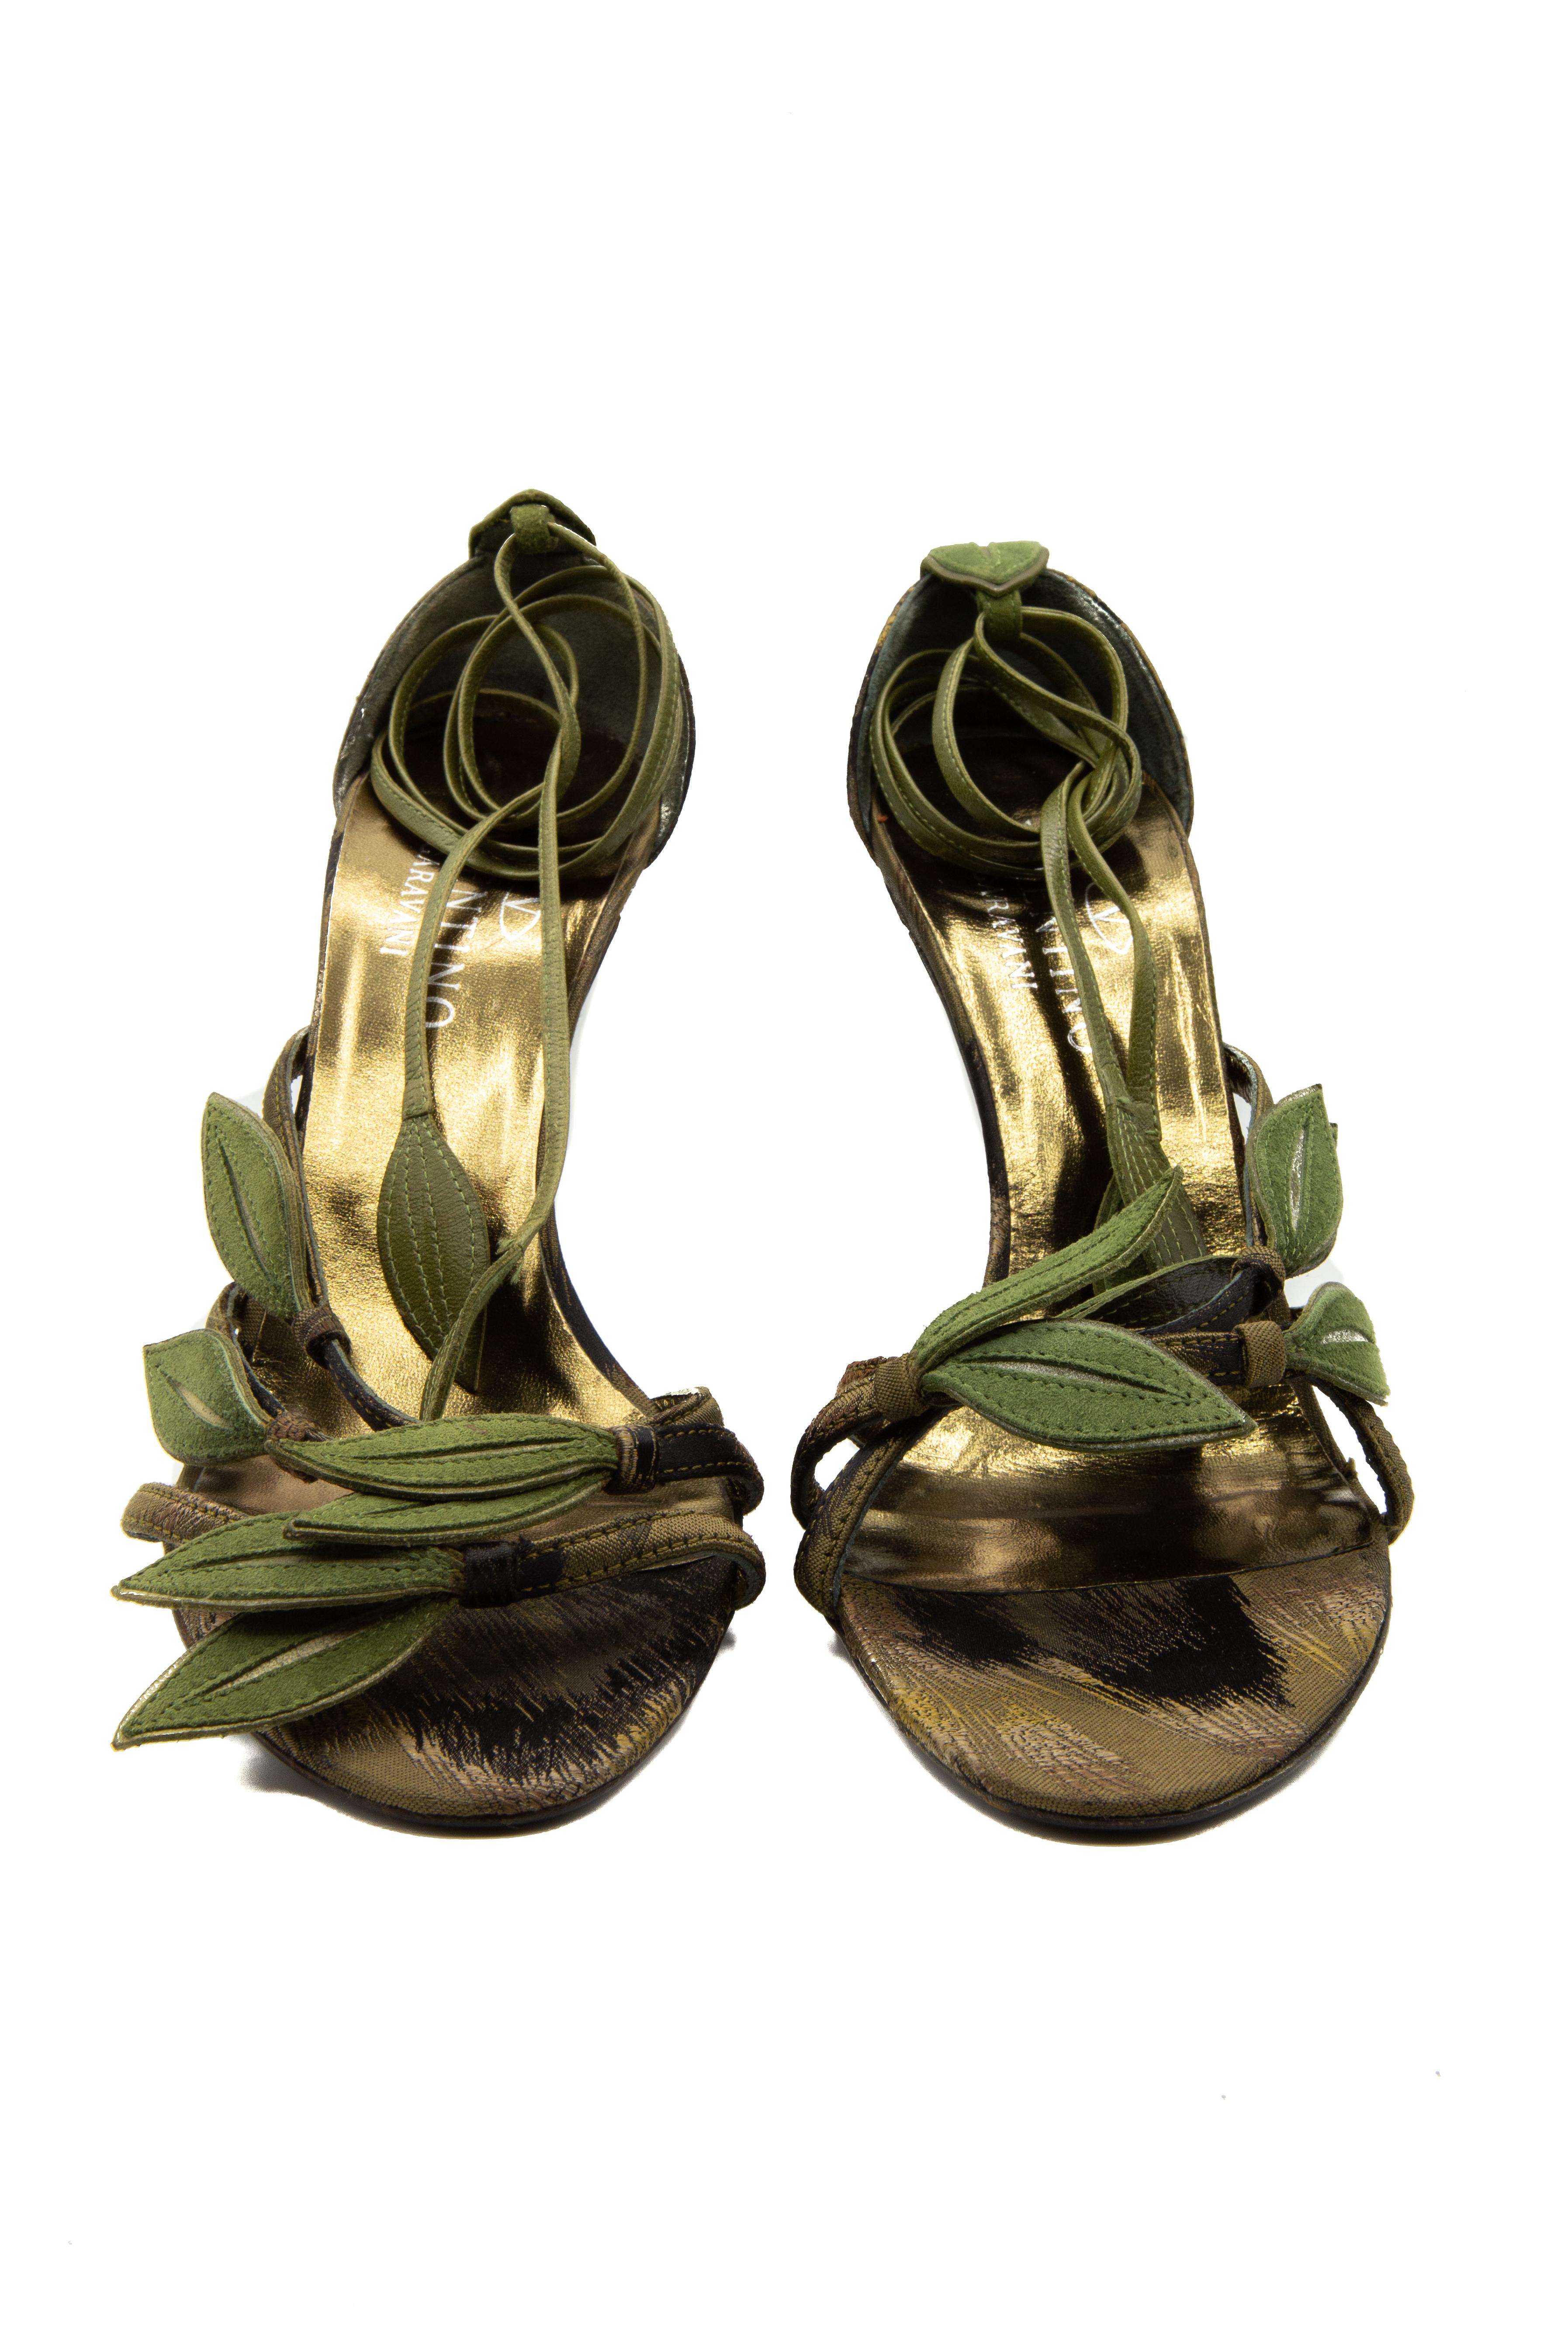 Valentino Garavani Bamboo Sandal Leaf Heel. With stylised ankle straps resembling vines, these pewter sandals give the illusion of vines climbing the wearer's leg. Forest green straps with a metallic copper heel give the heels a feeling that is